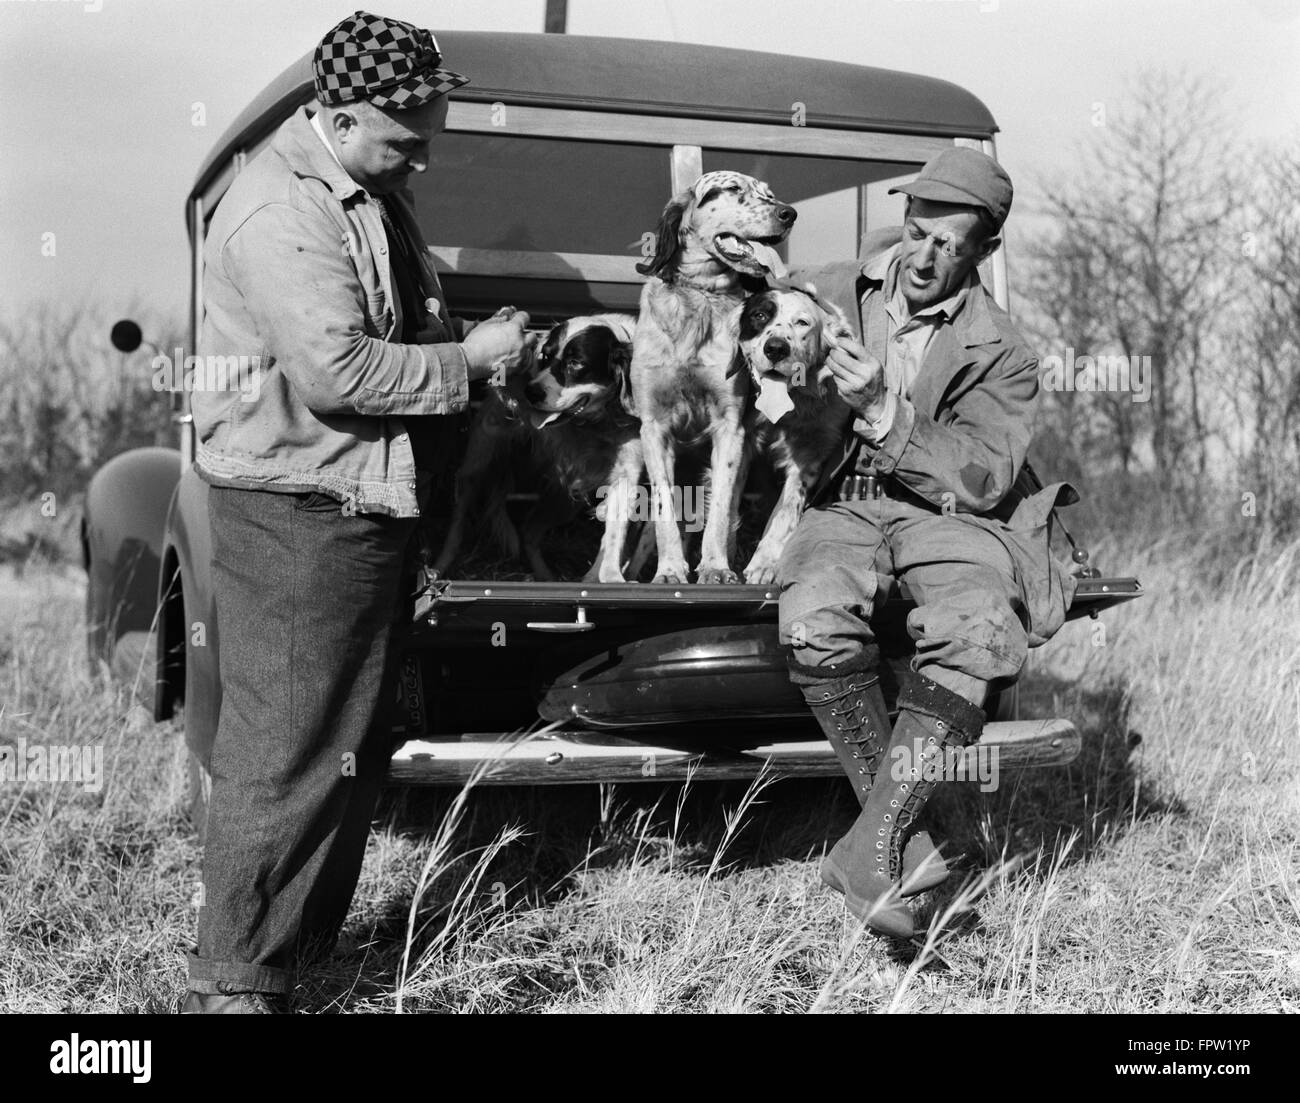 1930s TWO MEN IN HUNTING CLOTHES SITTING STANDING WITH ENGLISH SETTER DOGS ON BACK OF WOODIE STATION WAGON Stock Photo